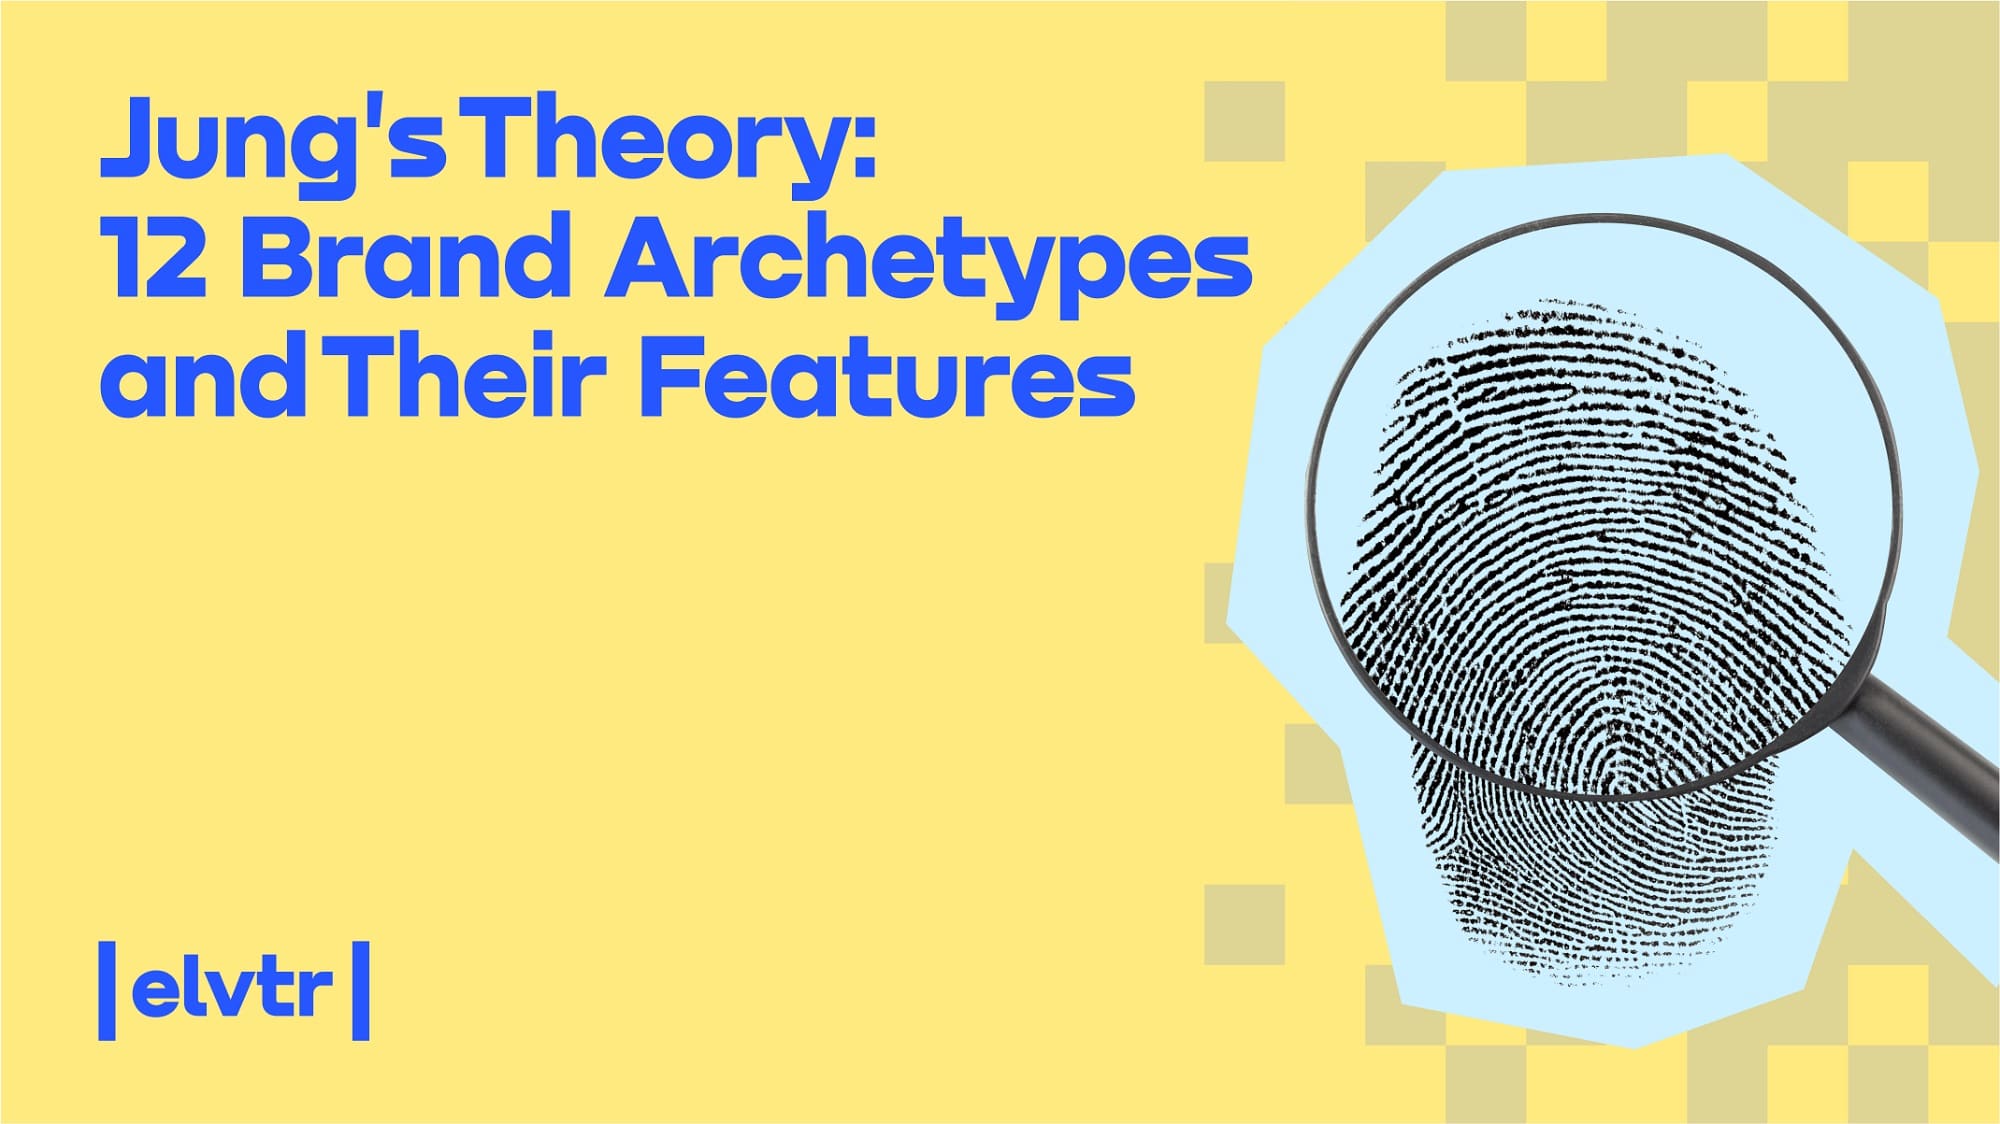 JUNG'S THEORY: 12 BRAND ARCHETYPES AND THEIR FEATURES image